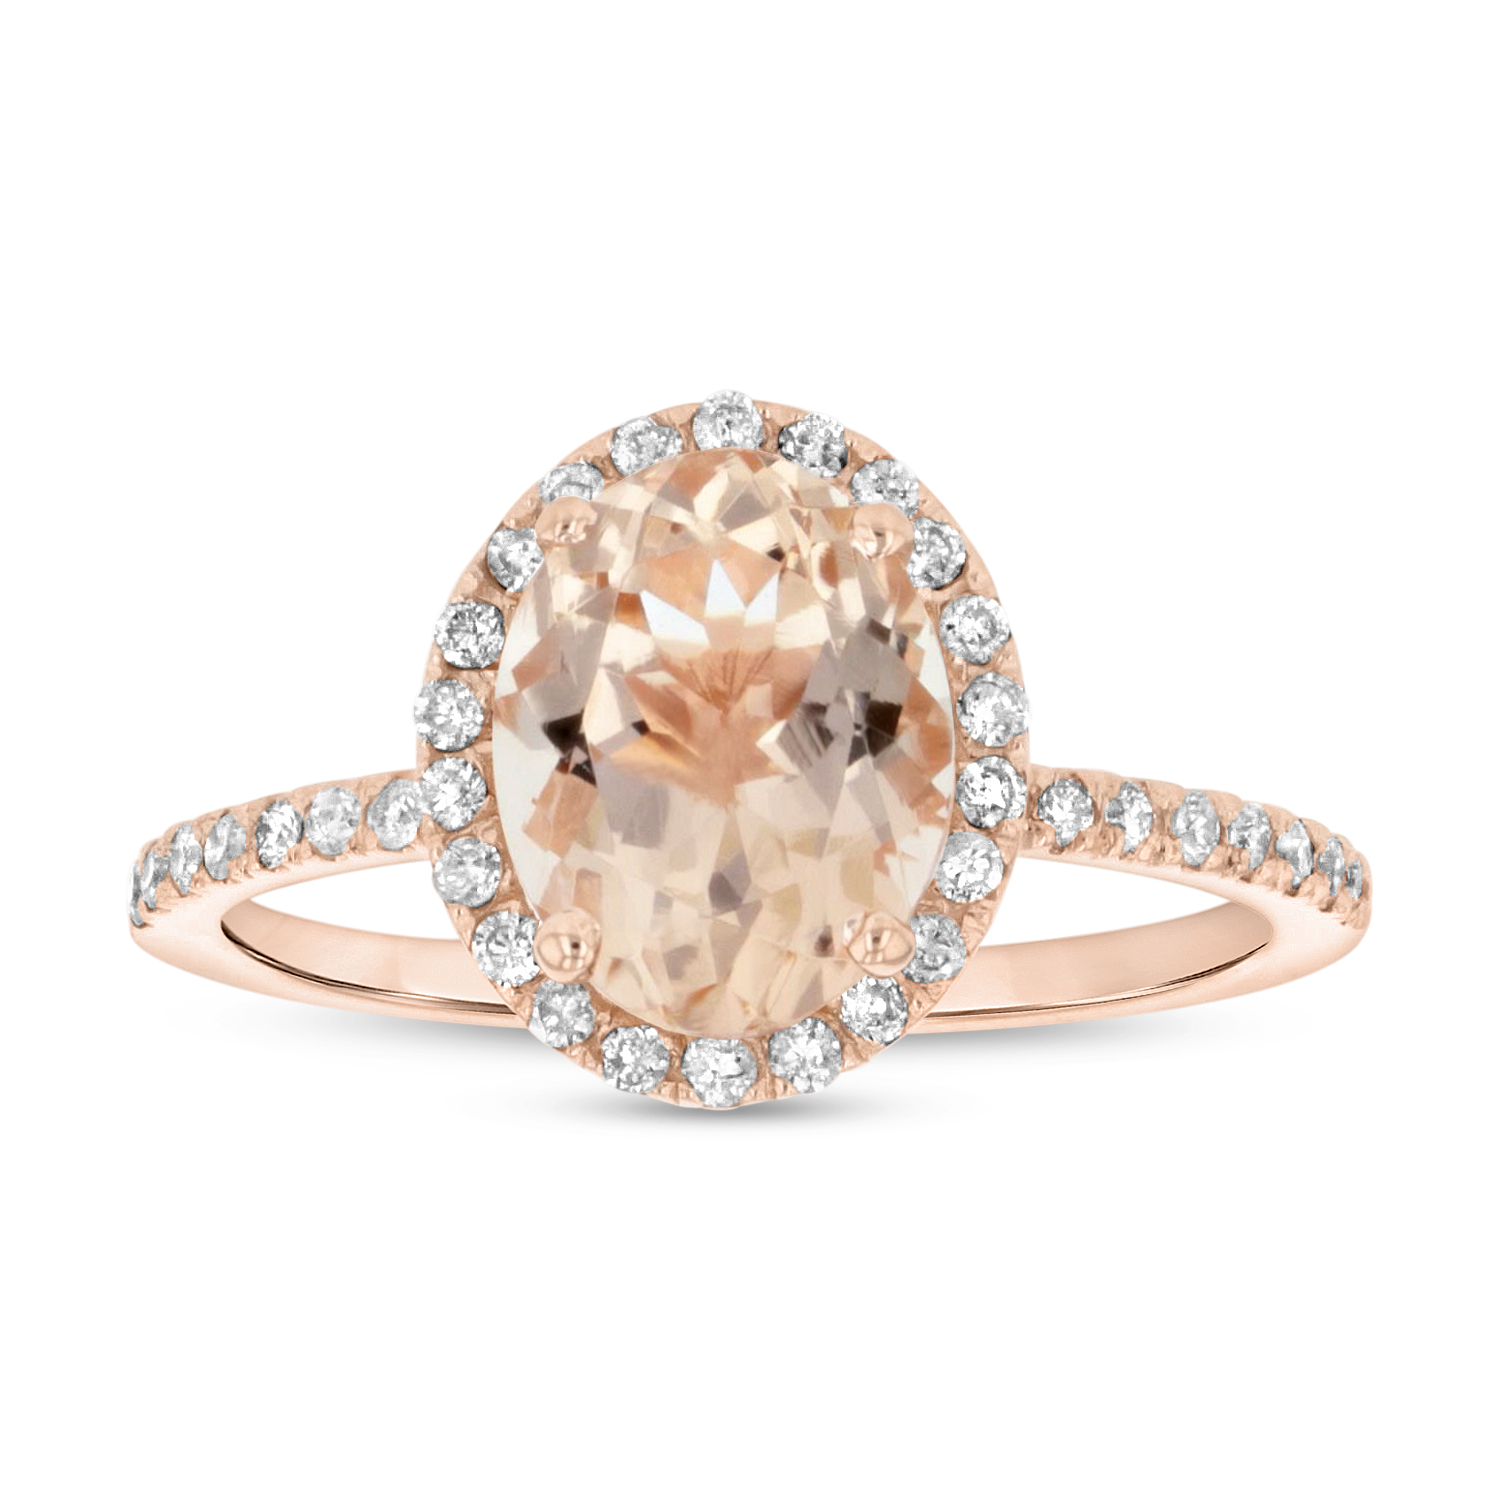 View 9X7 mm Oval Morganite and Diamond Ring in 14k Rose Gold